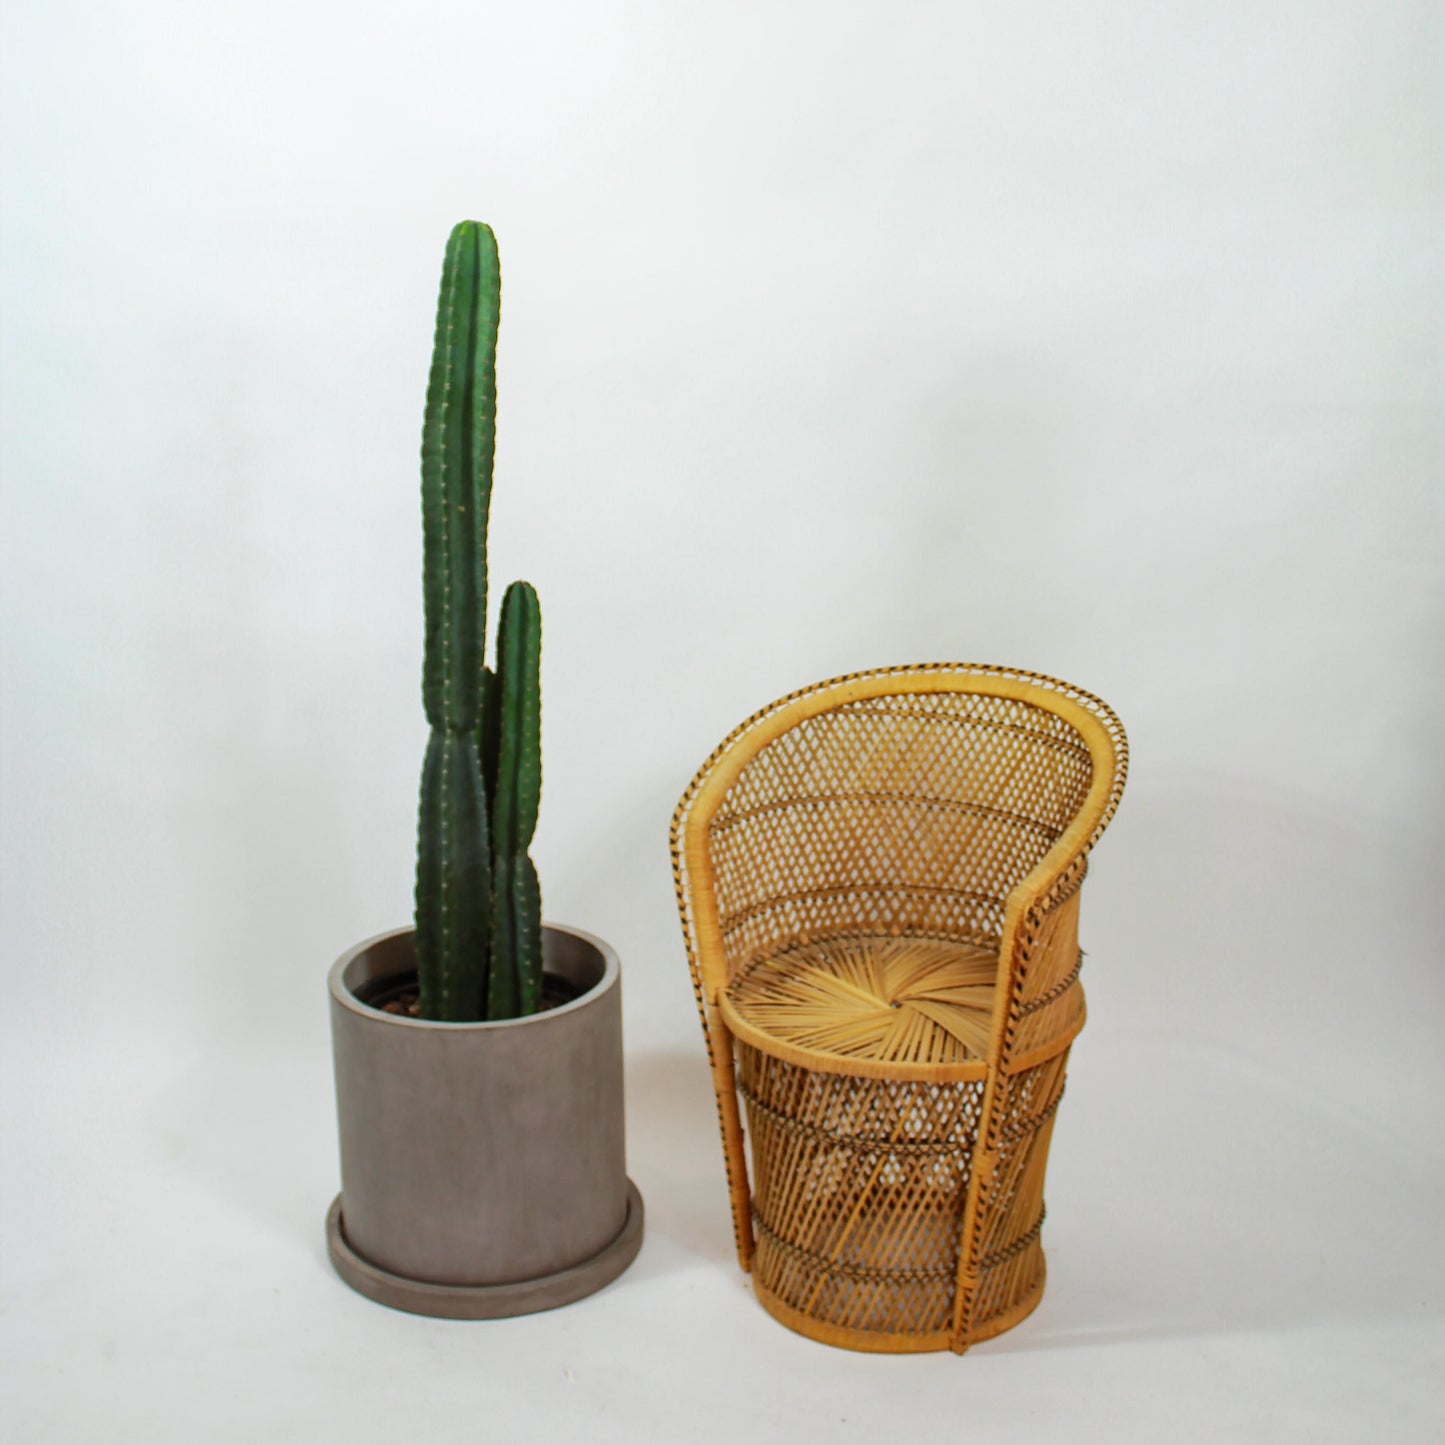 Peruvian Cactus, Peruvian Torch Cactus, Column Cactus (Cereus repandus) in a 14 inch pot. Indoor plant for sale by Promise Supply for delivery and pickup in Toronto